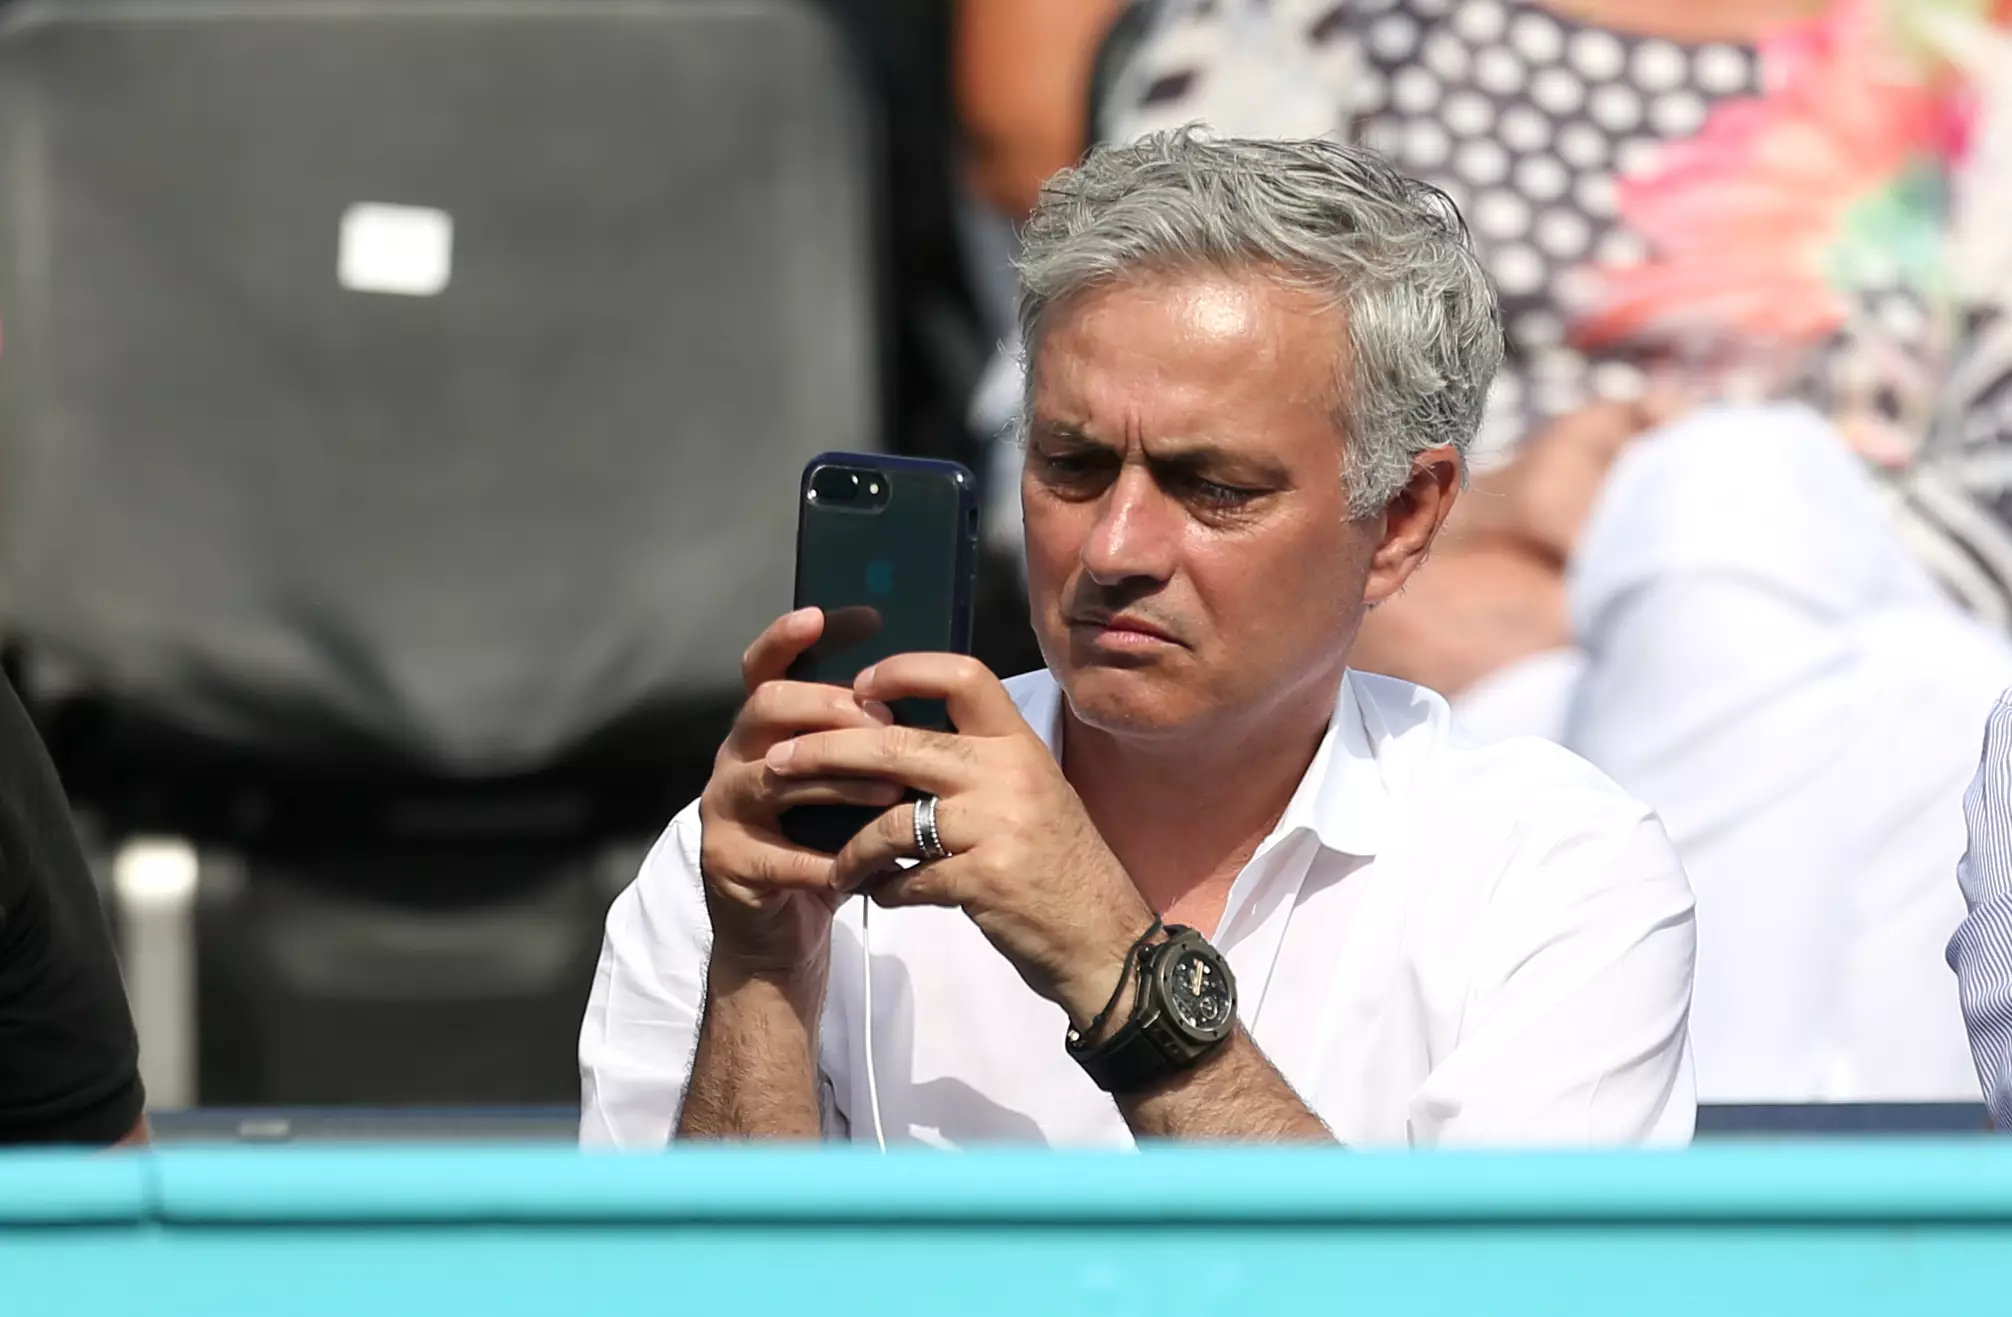 Mourinho trying to work out Chinese on his phone. Image: PA Images